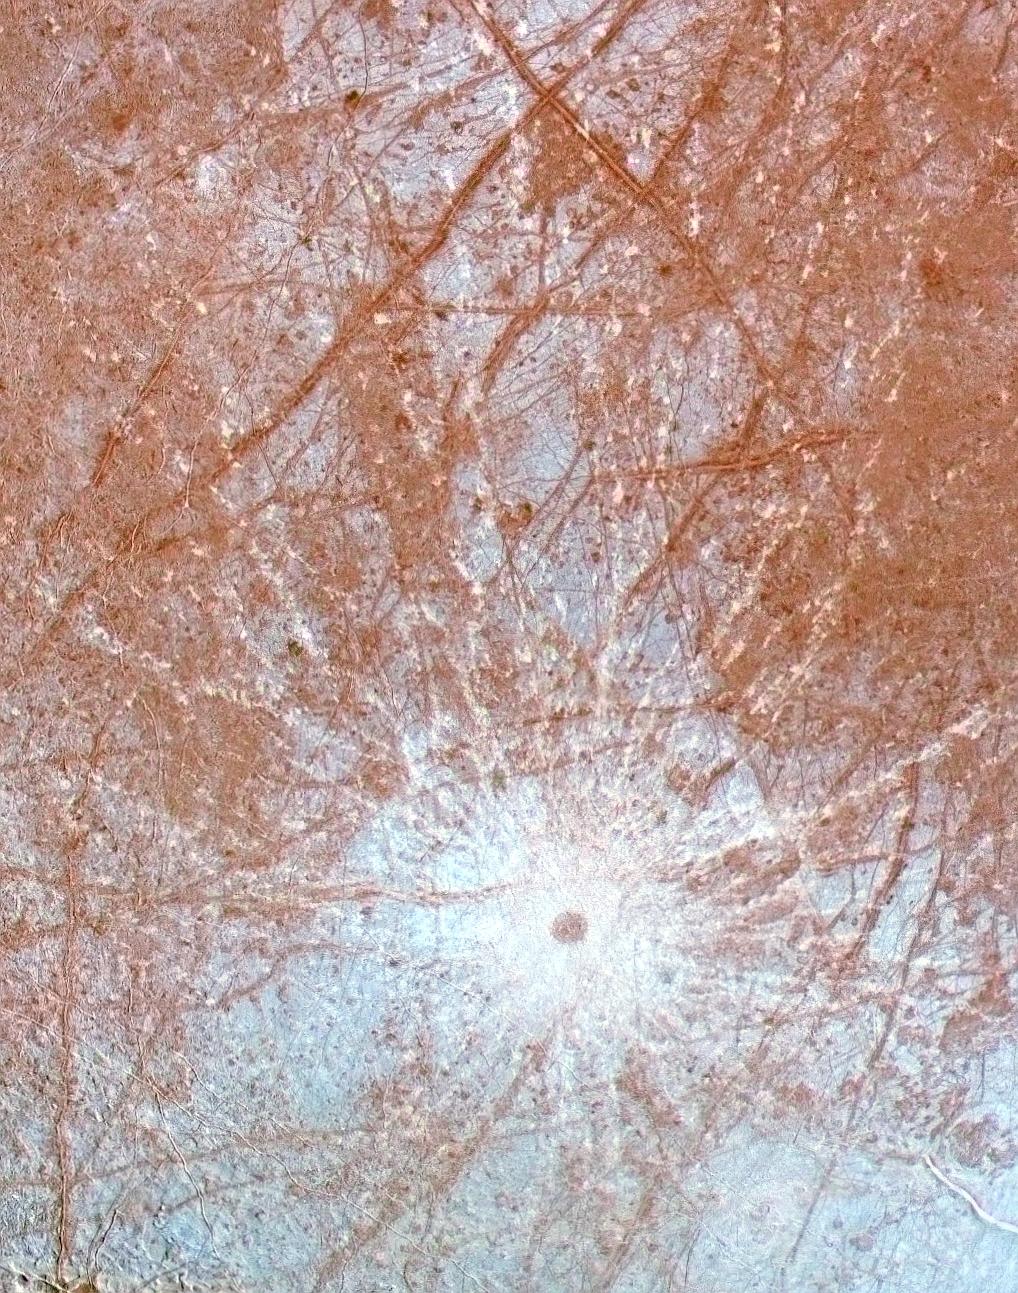 An impact crater marks the surface of Europa with bright rays of icy material radiating from the crater. The surrounding terrain has a pinkish hue.